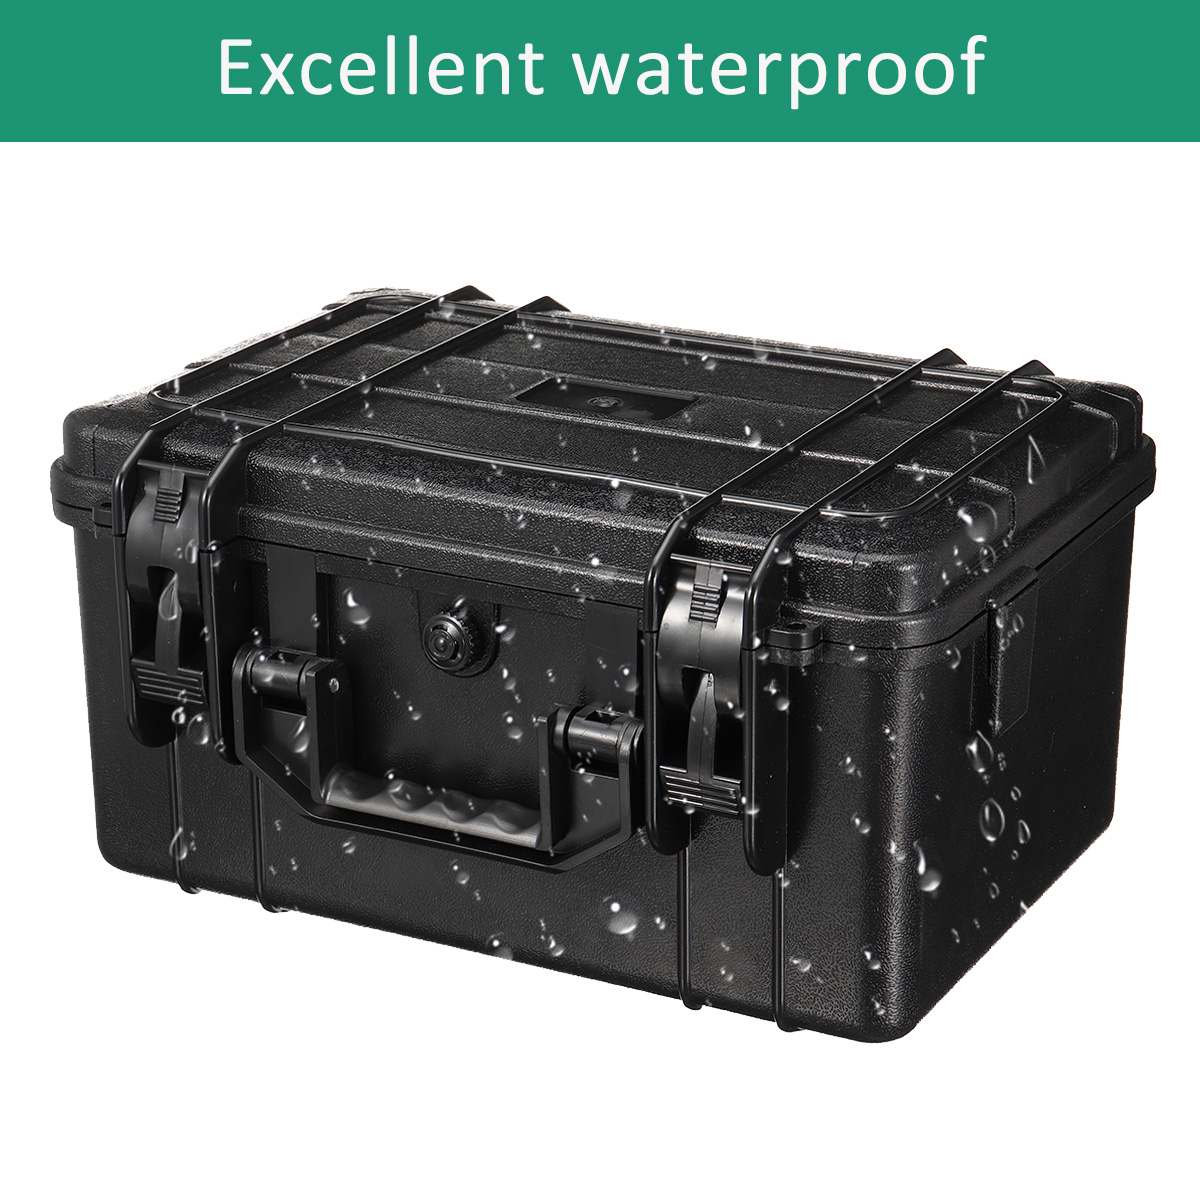 4-Sizes-ABS-Plastic-Sealed-Waterproof-Storage-Case-Foam-Impact--Resistant-Hiking-Portable-Tool-Box-D-1674189-3